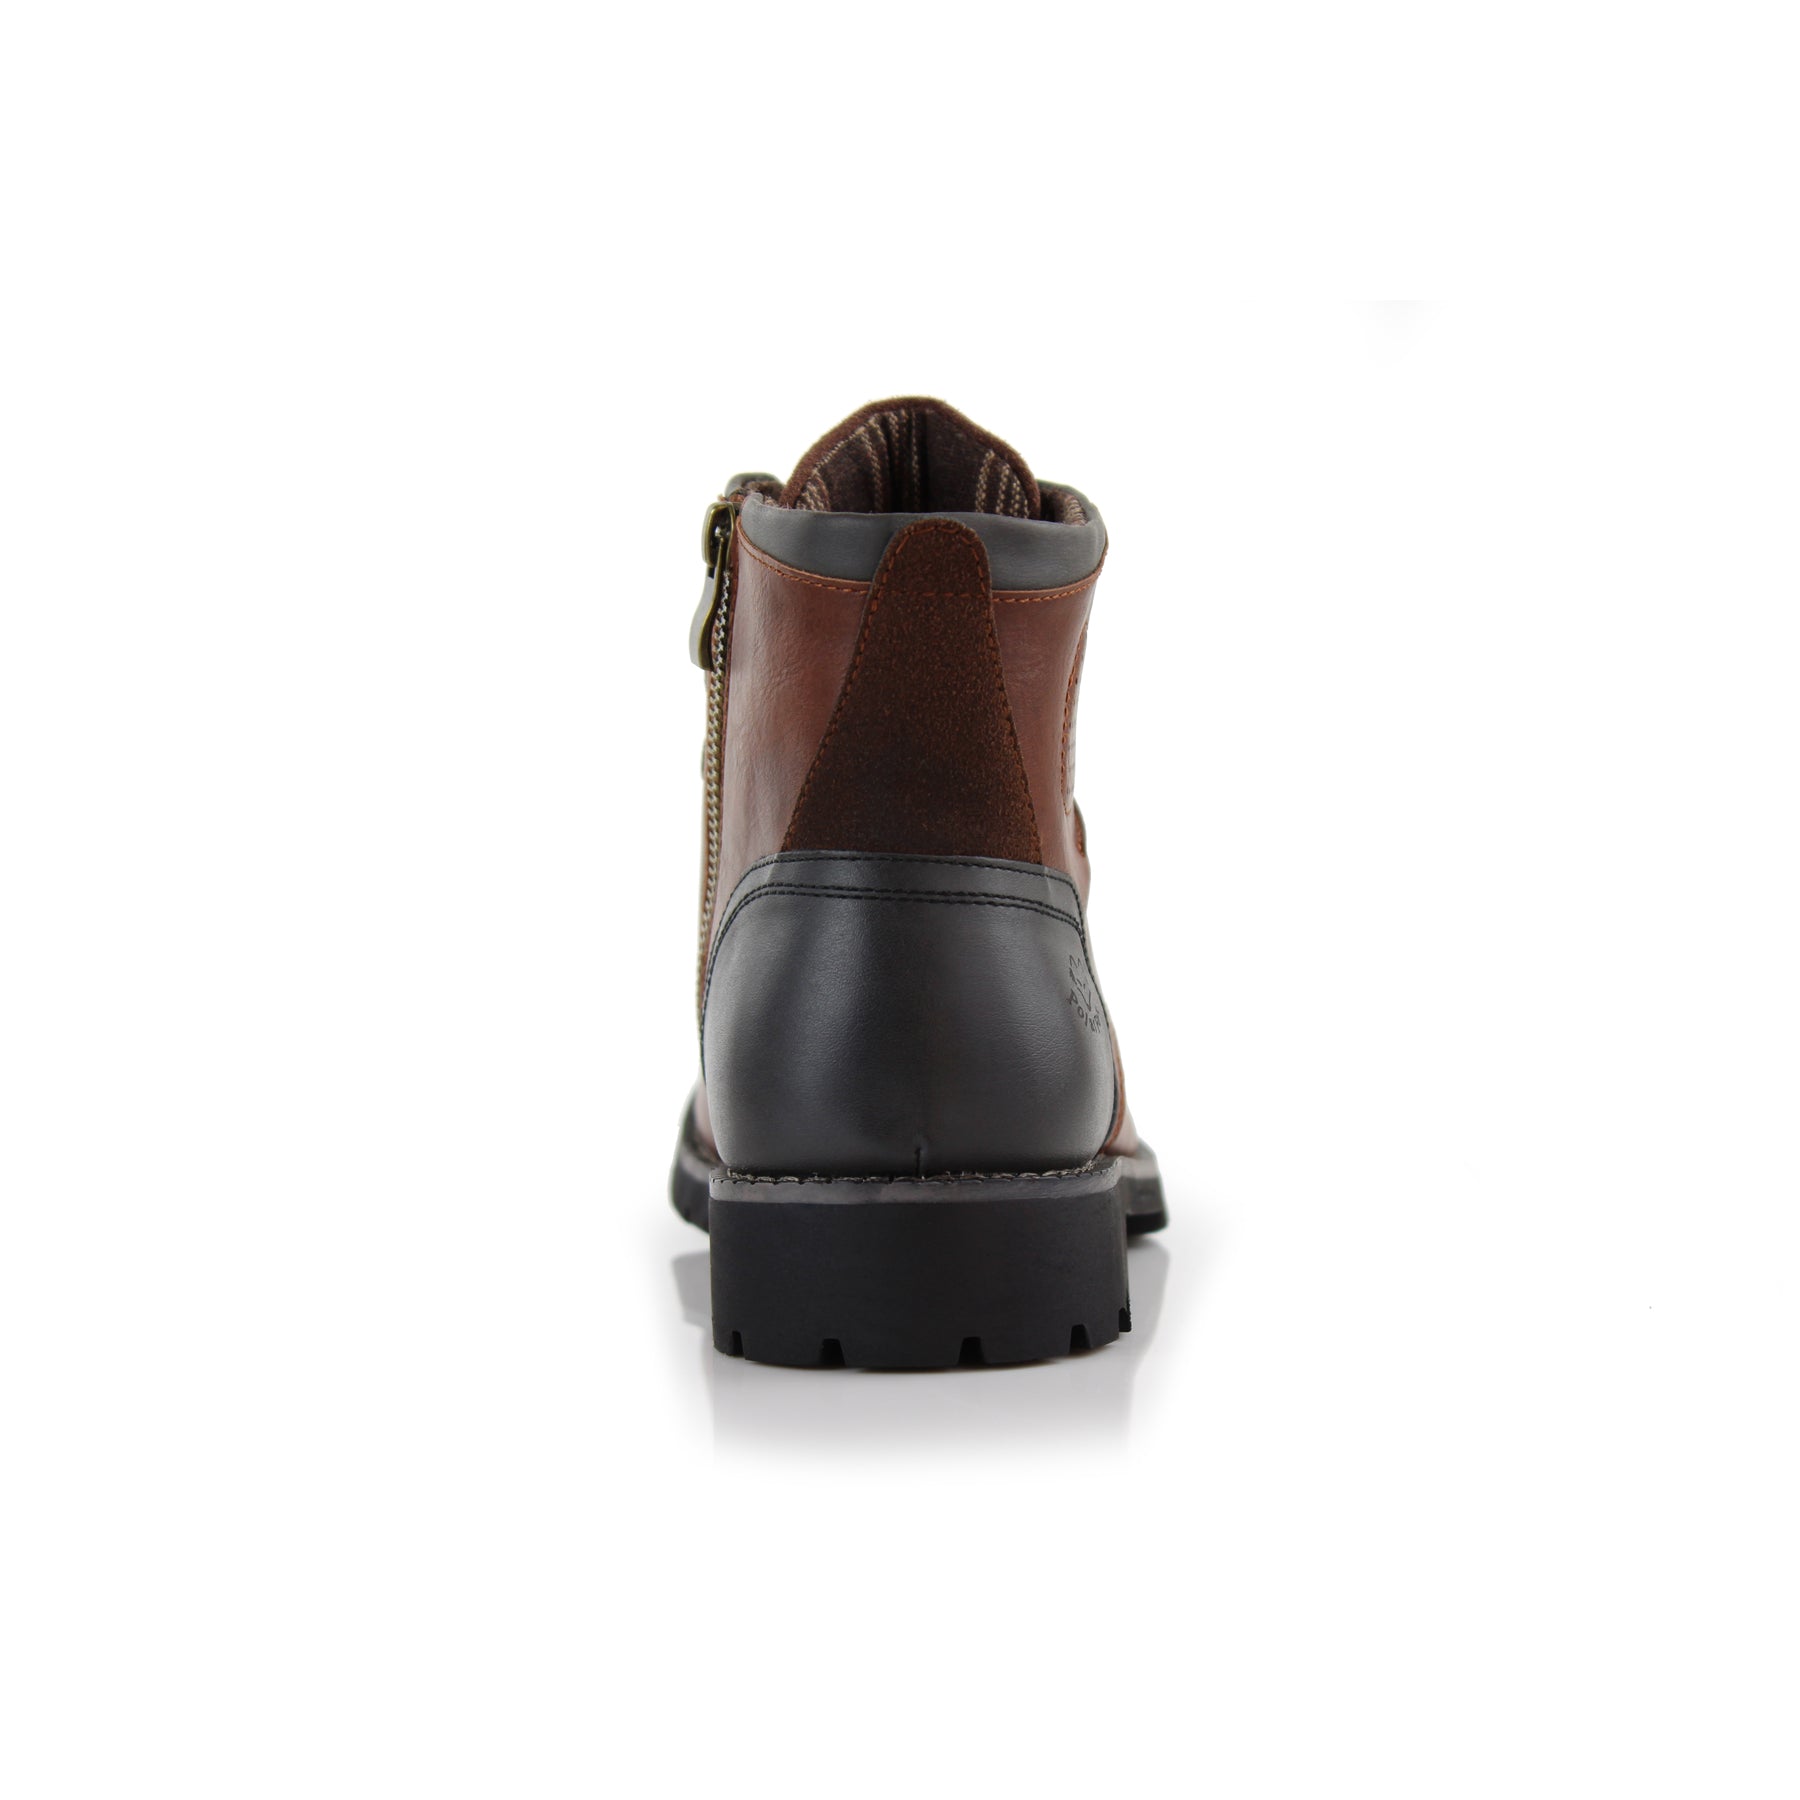 Two-Toned Rugged Boots | Homer by Polar Fox | Conal Footwear | Back Angle View